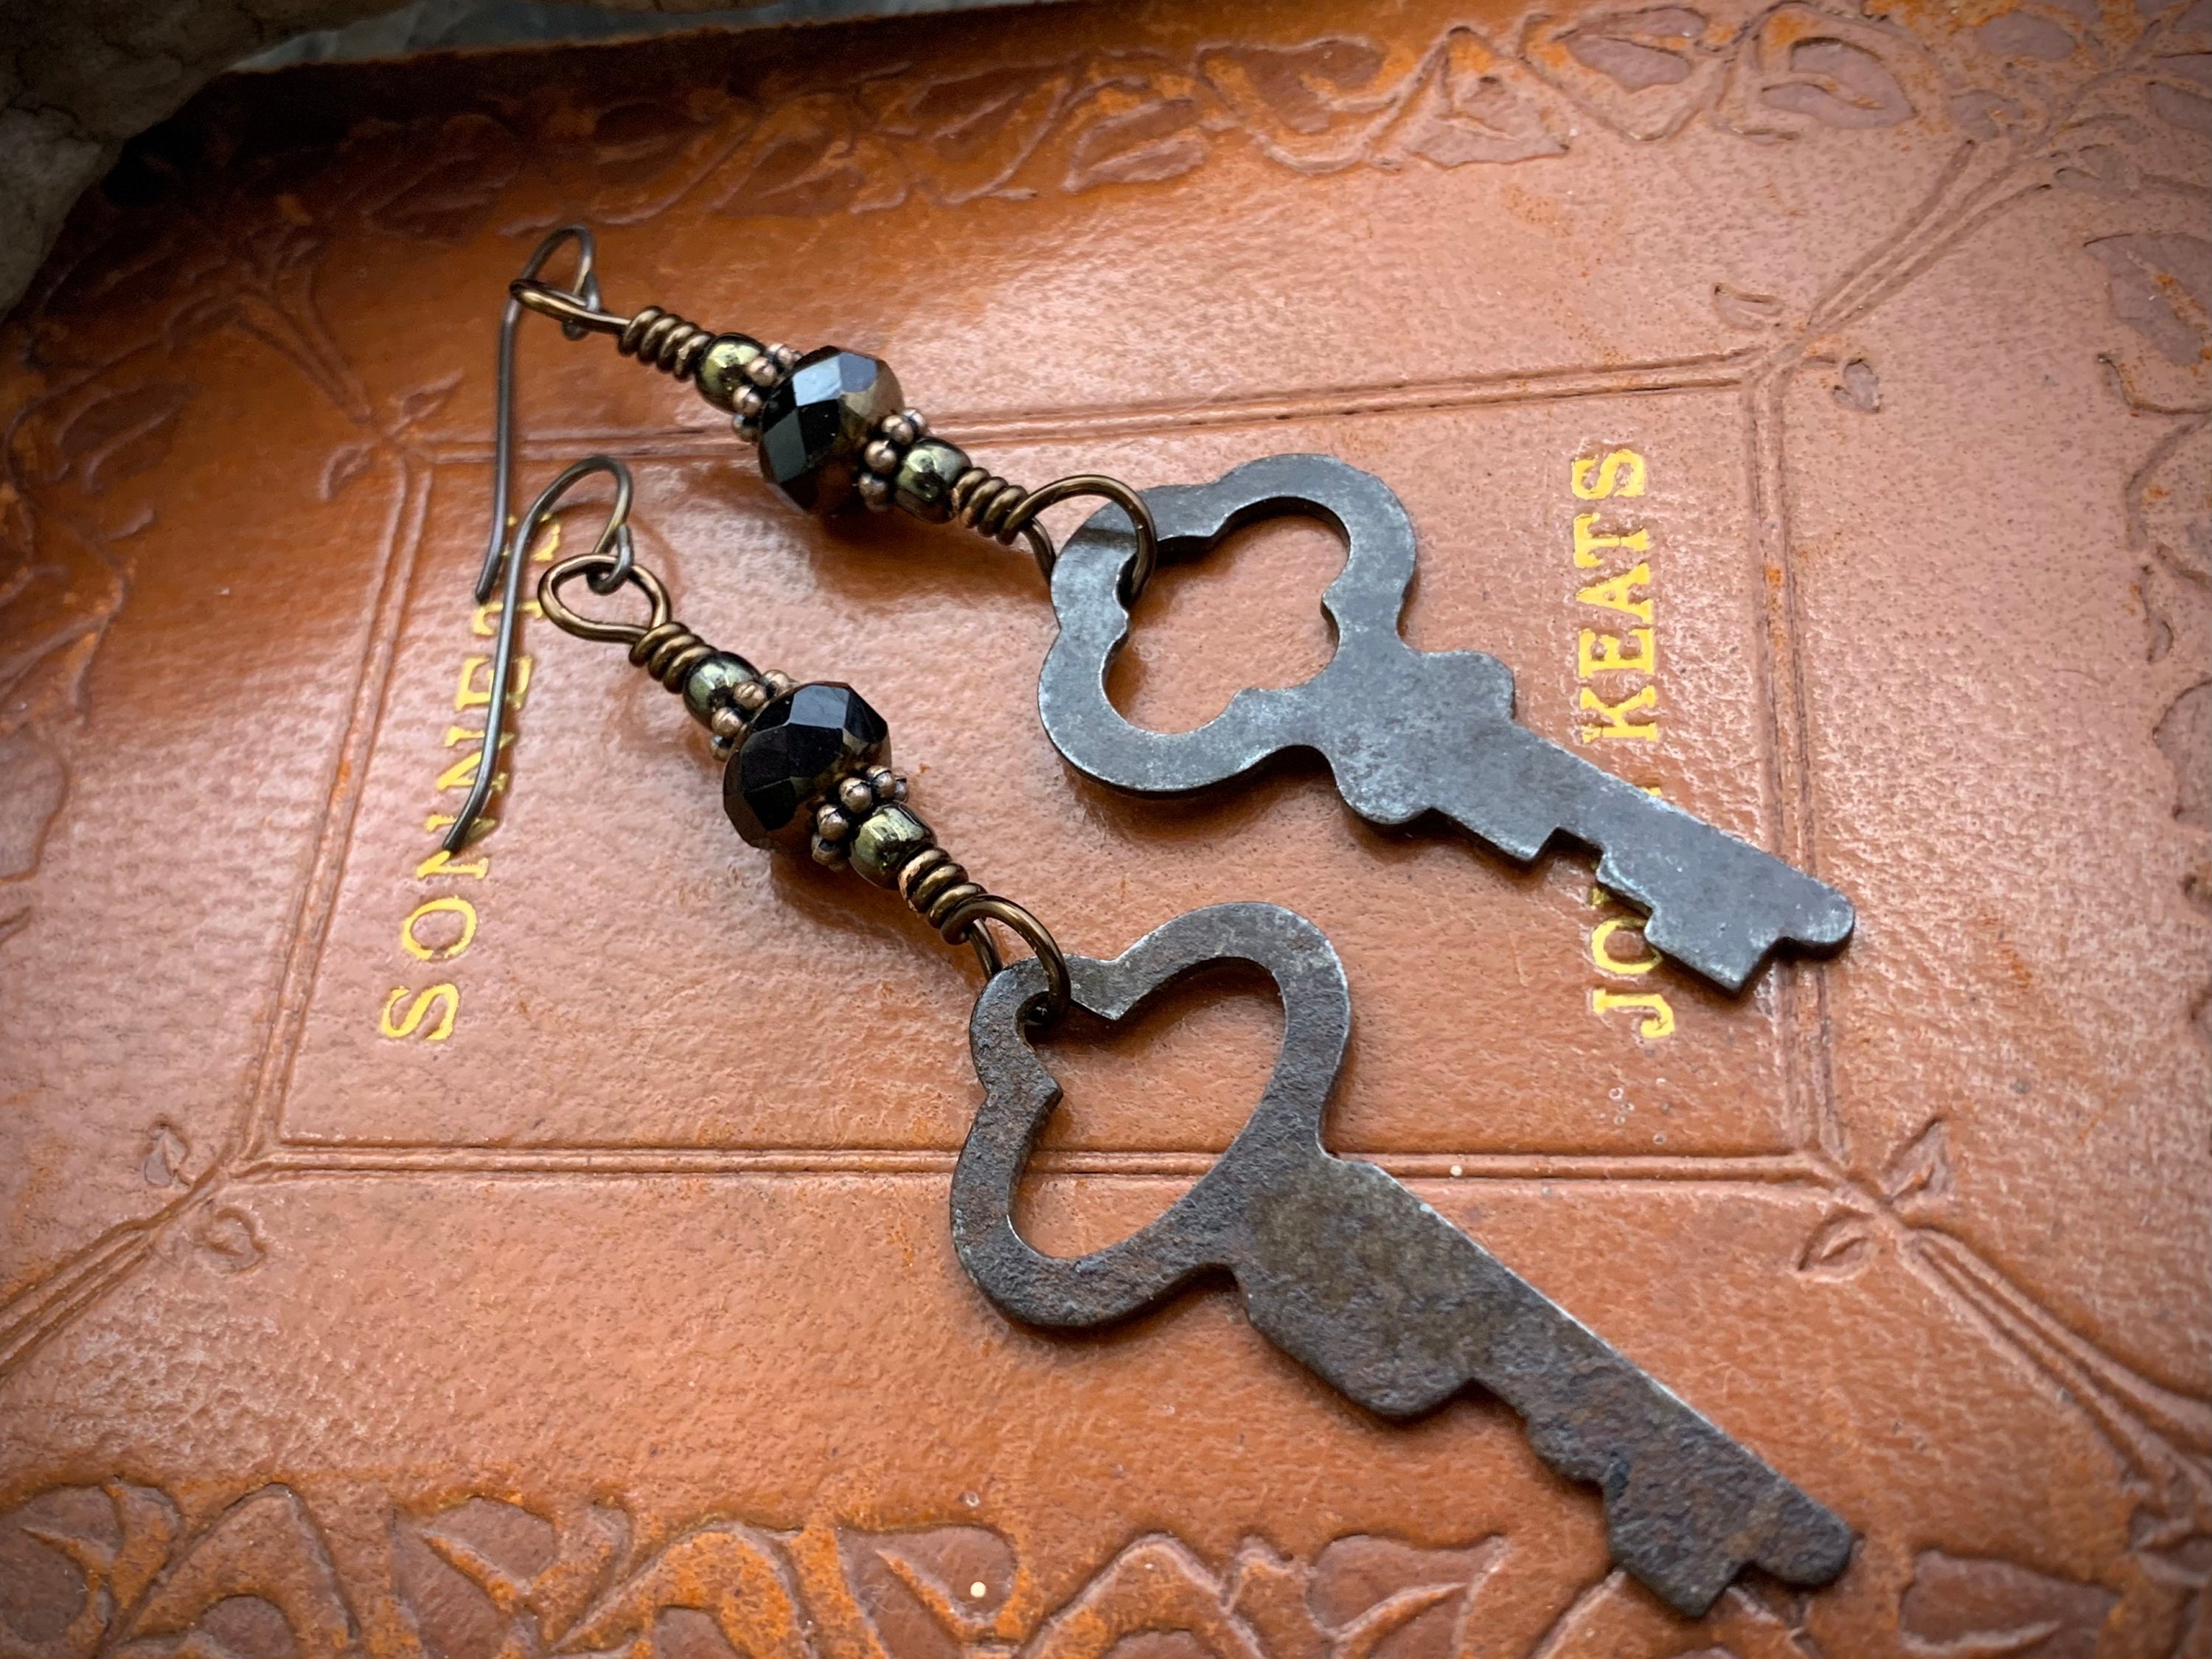 5 Vintage Flat Skeleton Keys In A Variety Of Cuts And Sizes